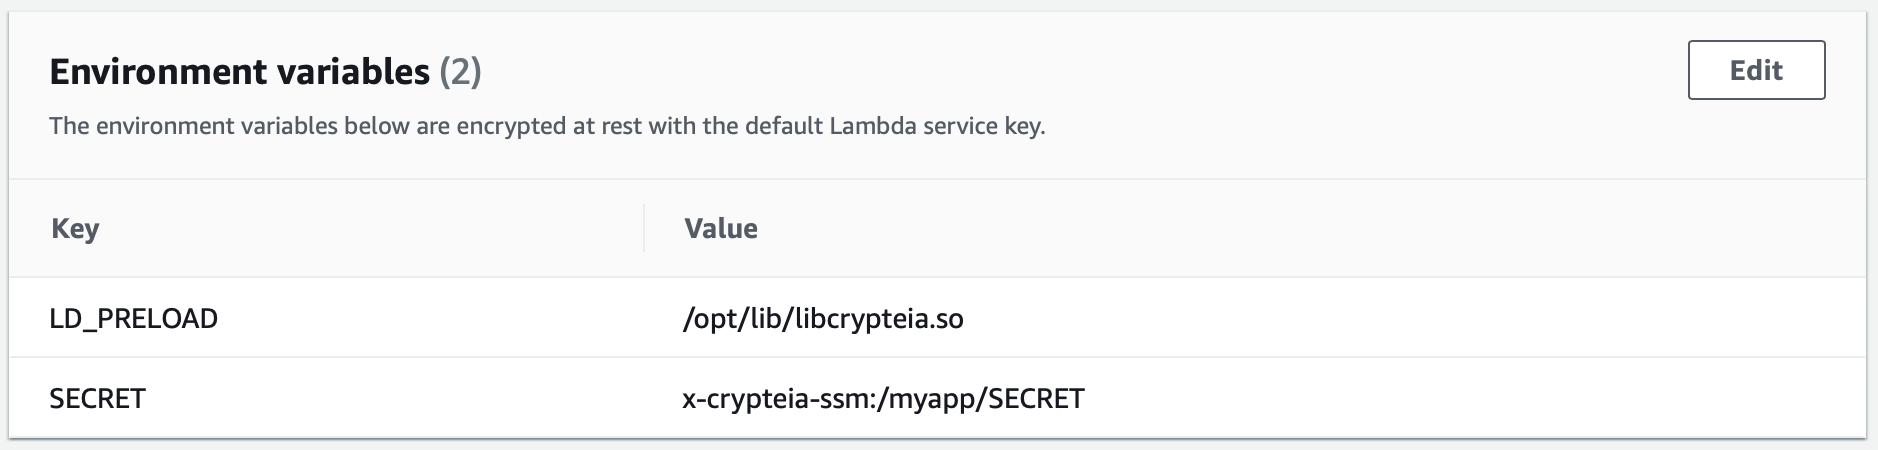 Screenshot of the Environment variables in the AWS Lambda Console showing LD_PRELOAD to /opt/lib/libcrypteia.so and SECRET to x-crypteia-ssm:/myapp/SECRET.